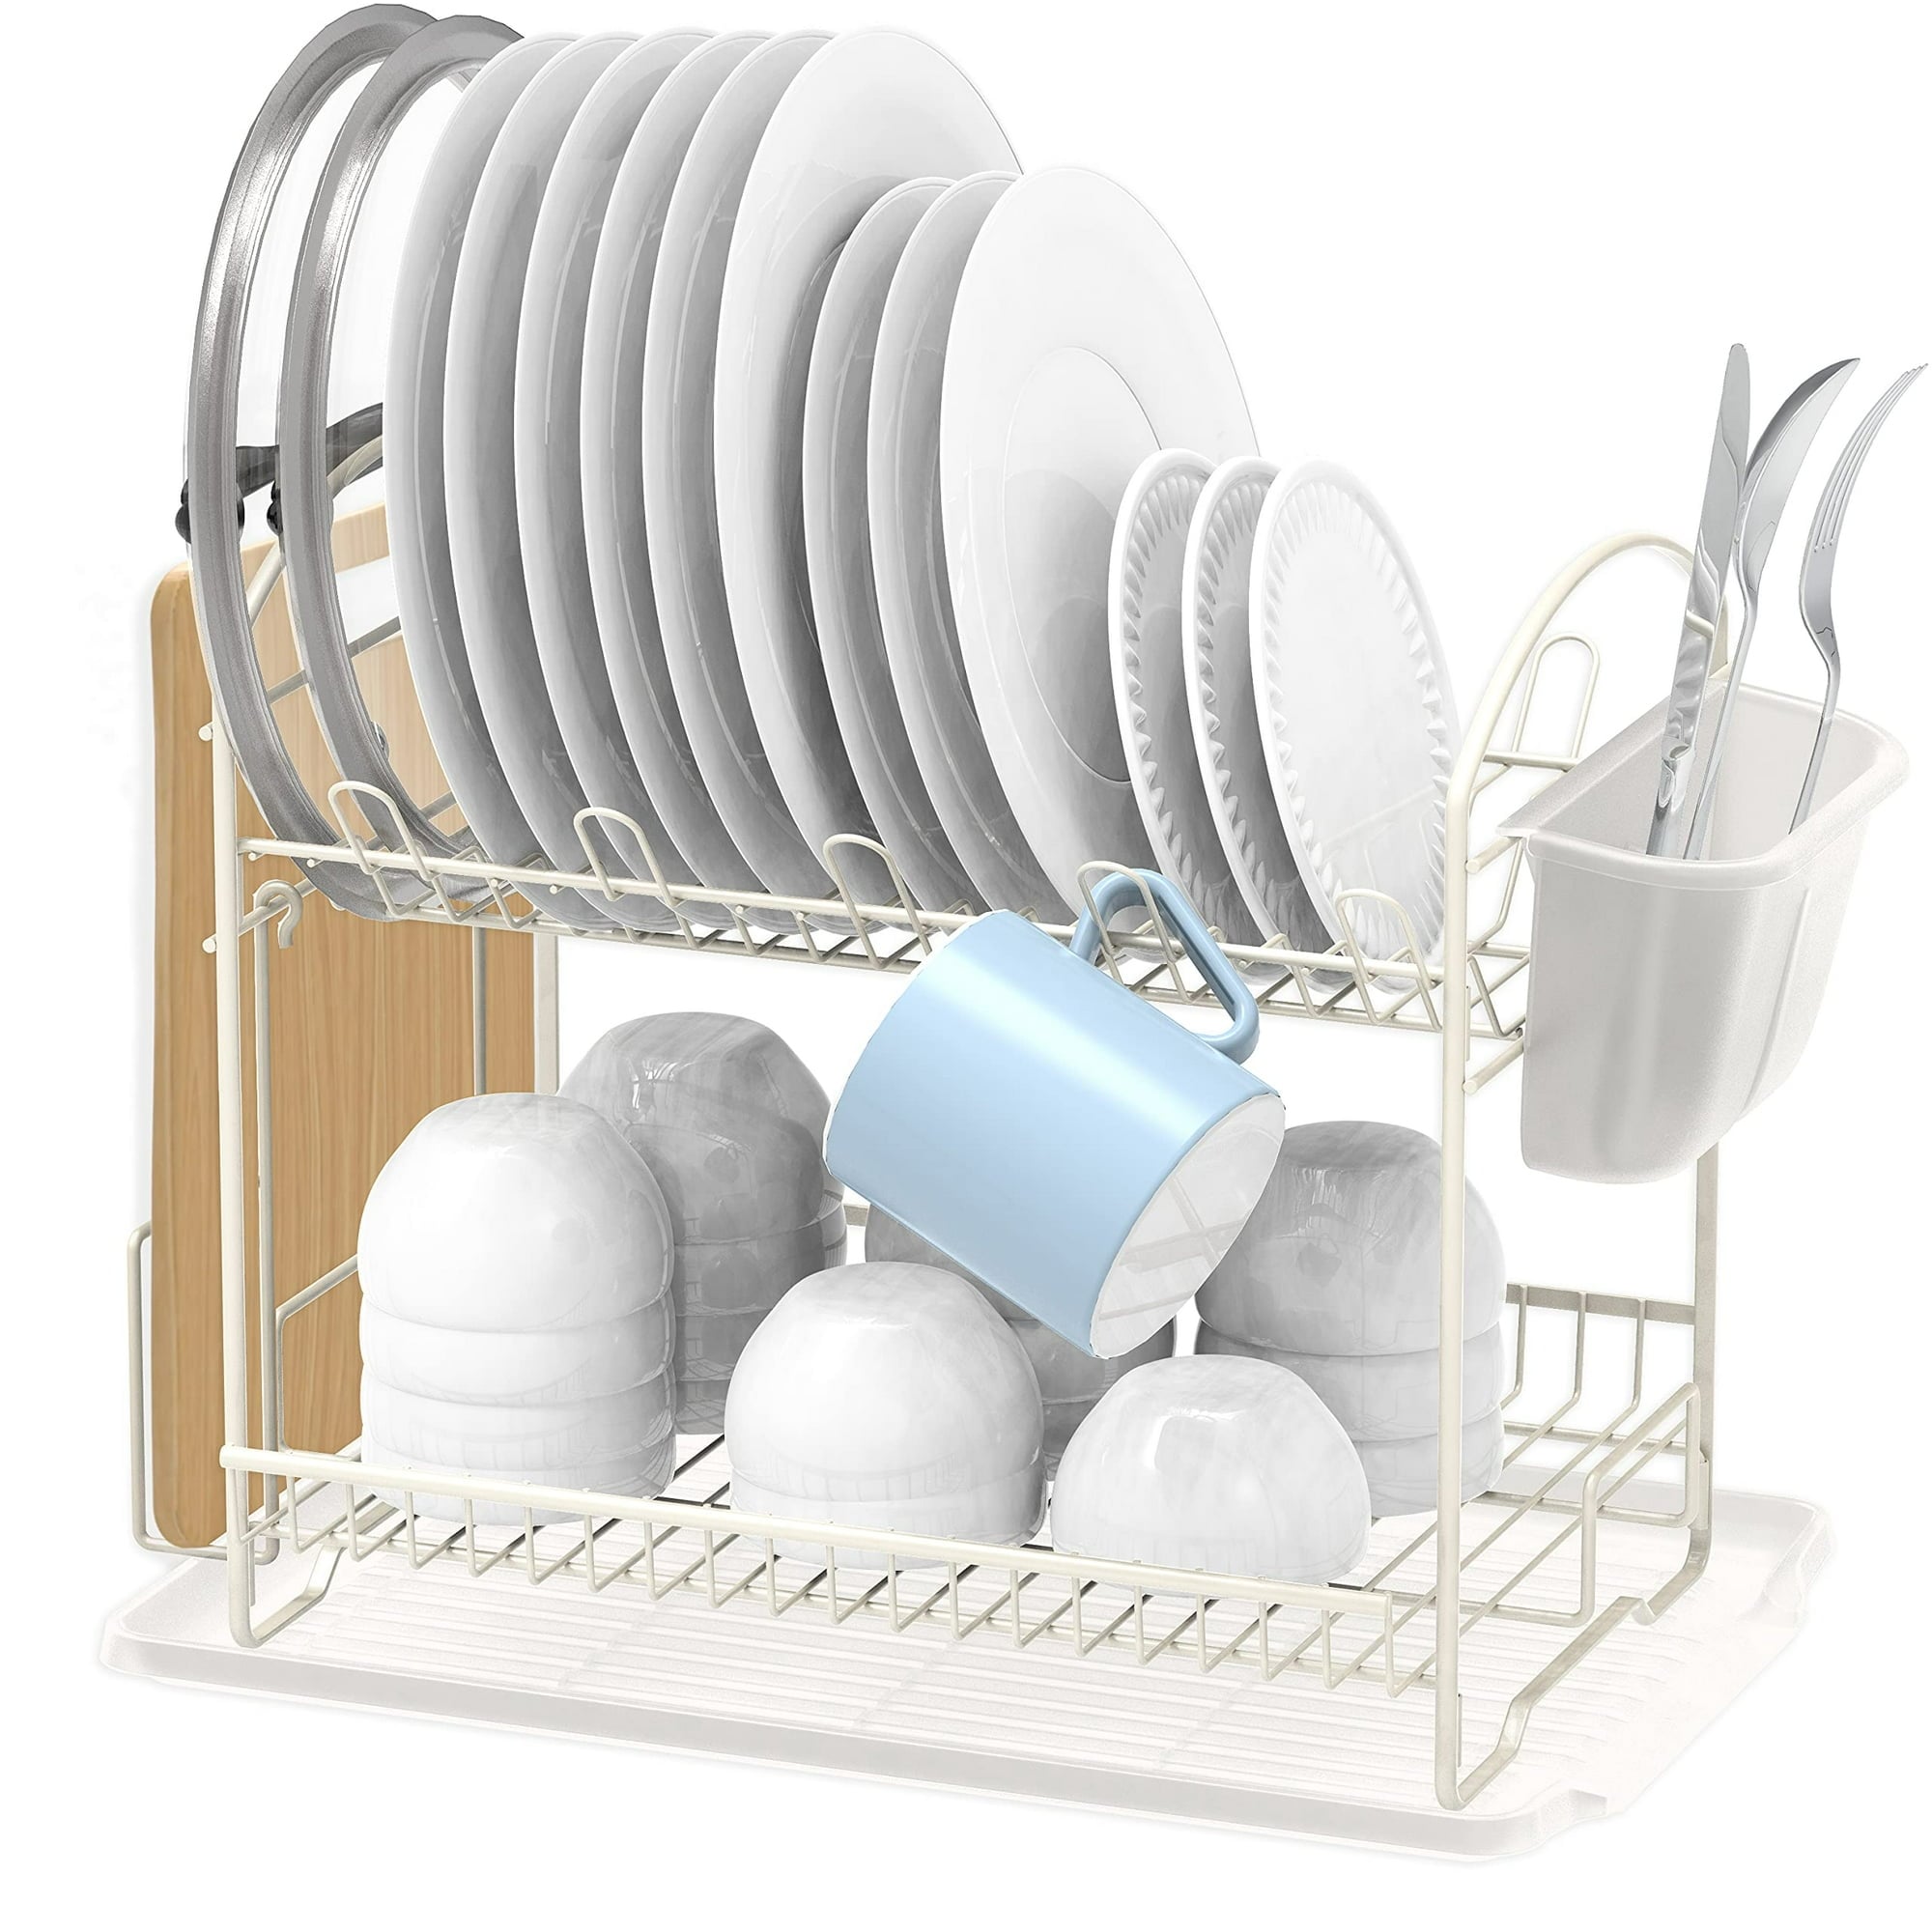 Drainage Board Dish Drying Rack with Microfiber Sheet Foldable